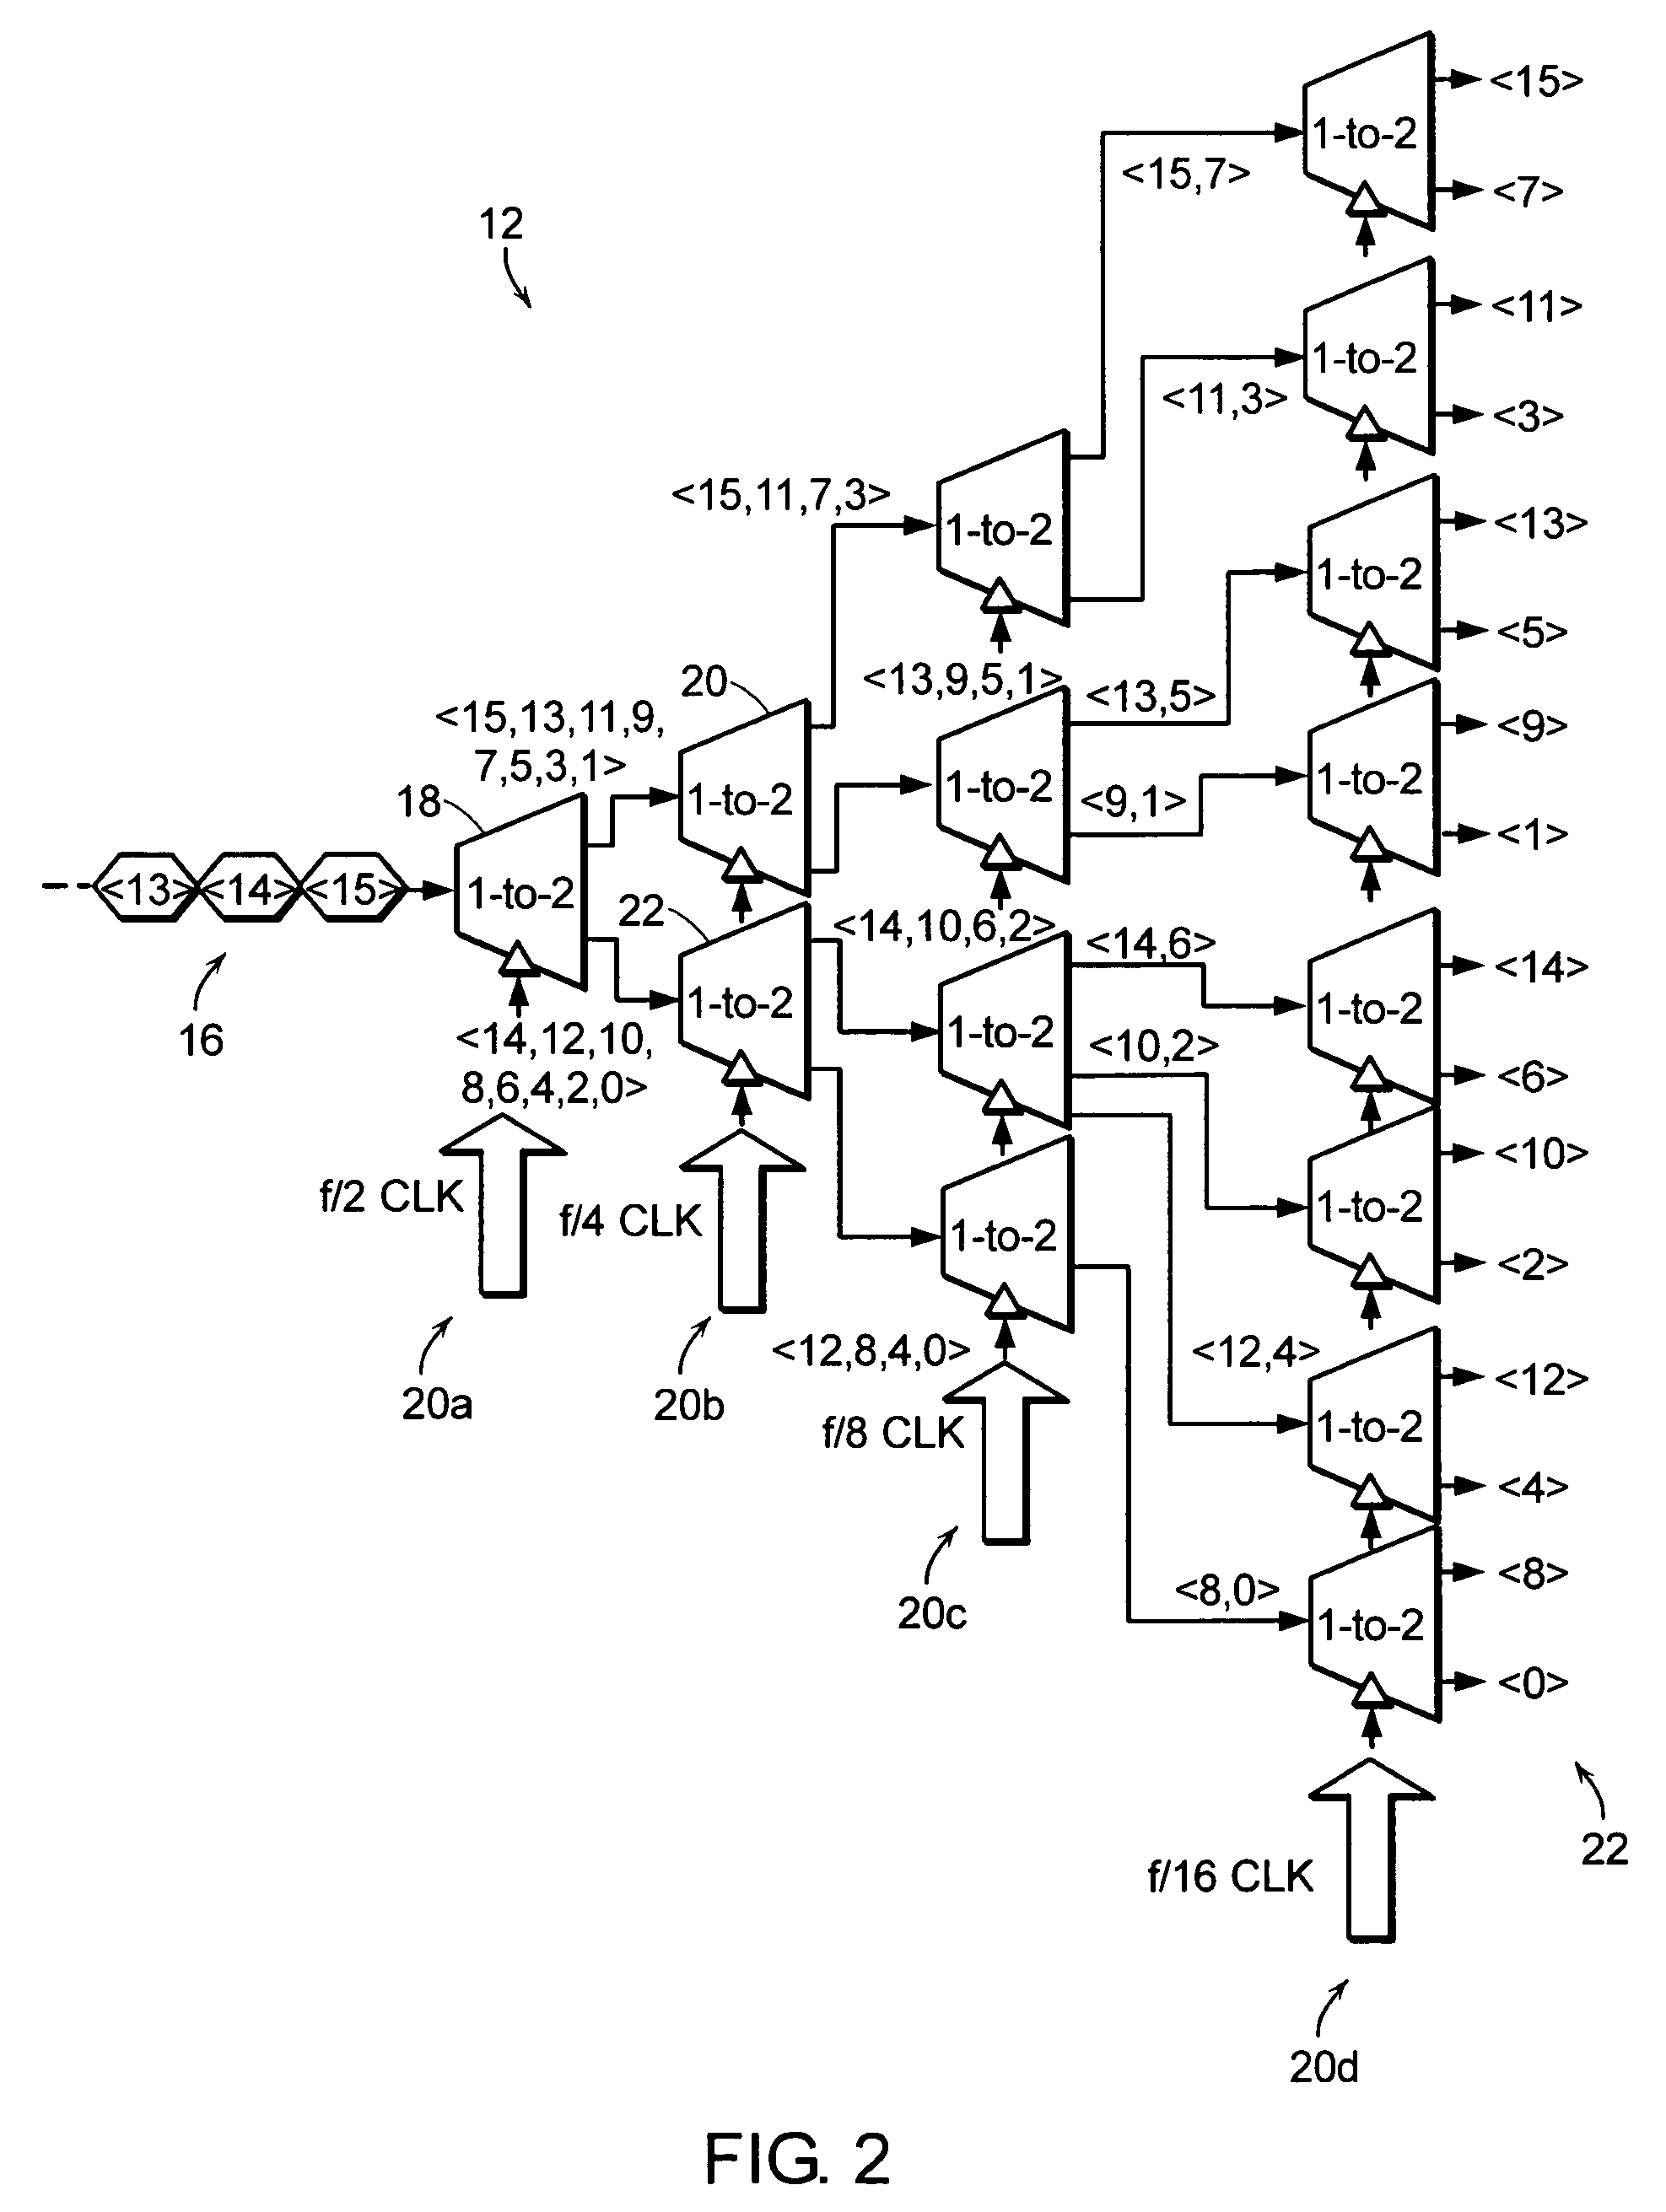 Cycle slip framing system and method for selectively increasing a frame clock cycle to maintain related bits within the same parallel-output frame of a deserializer